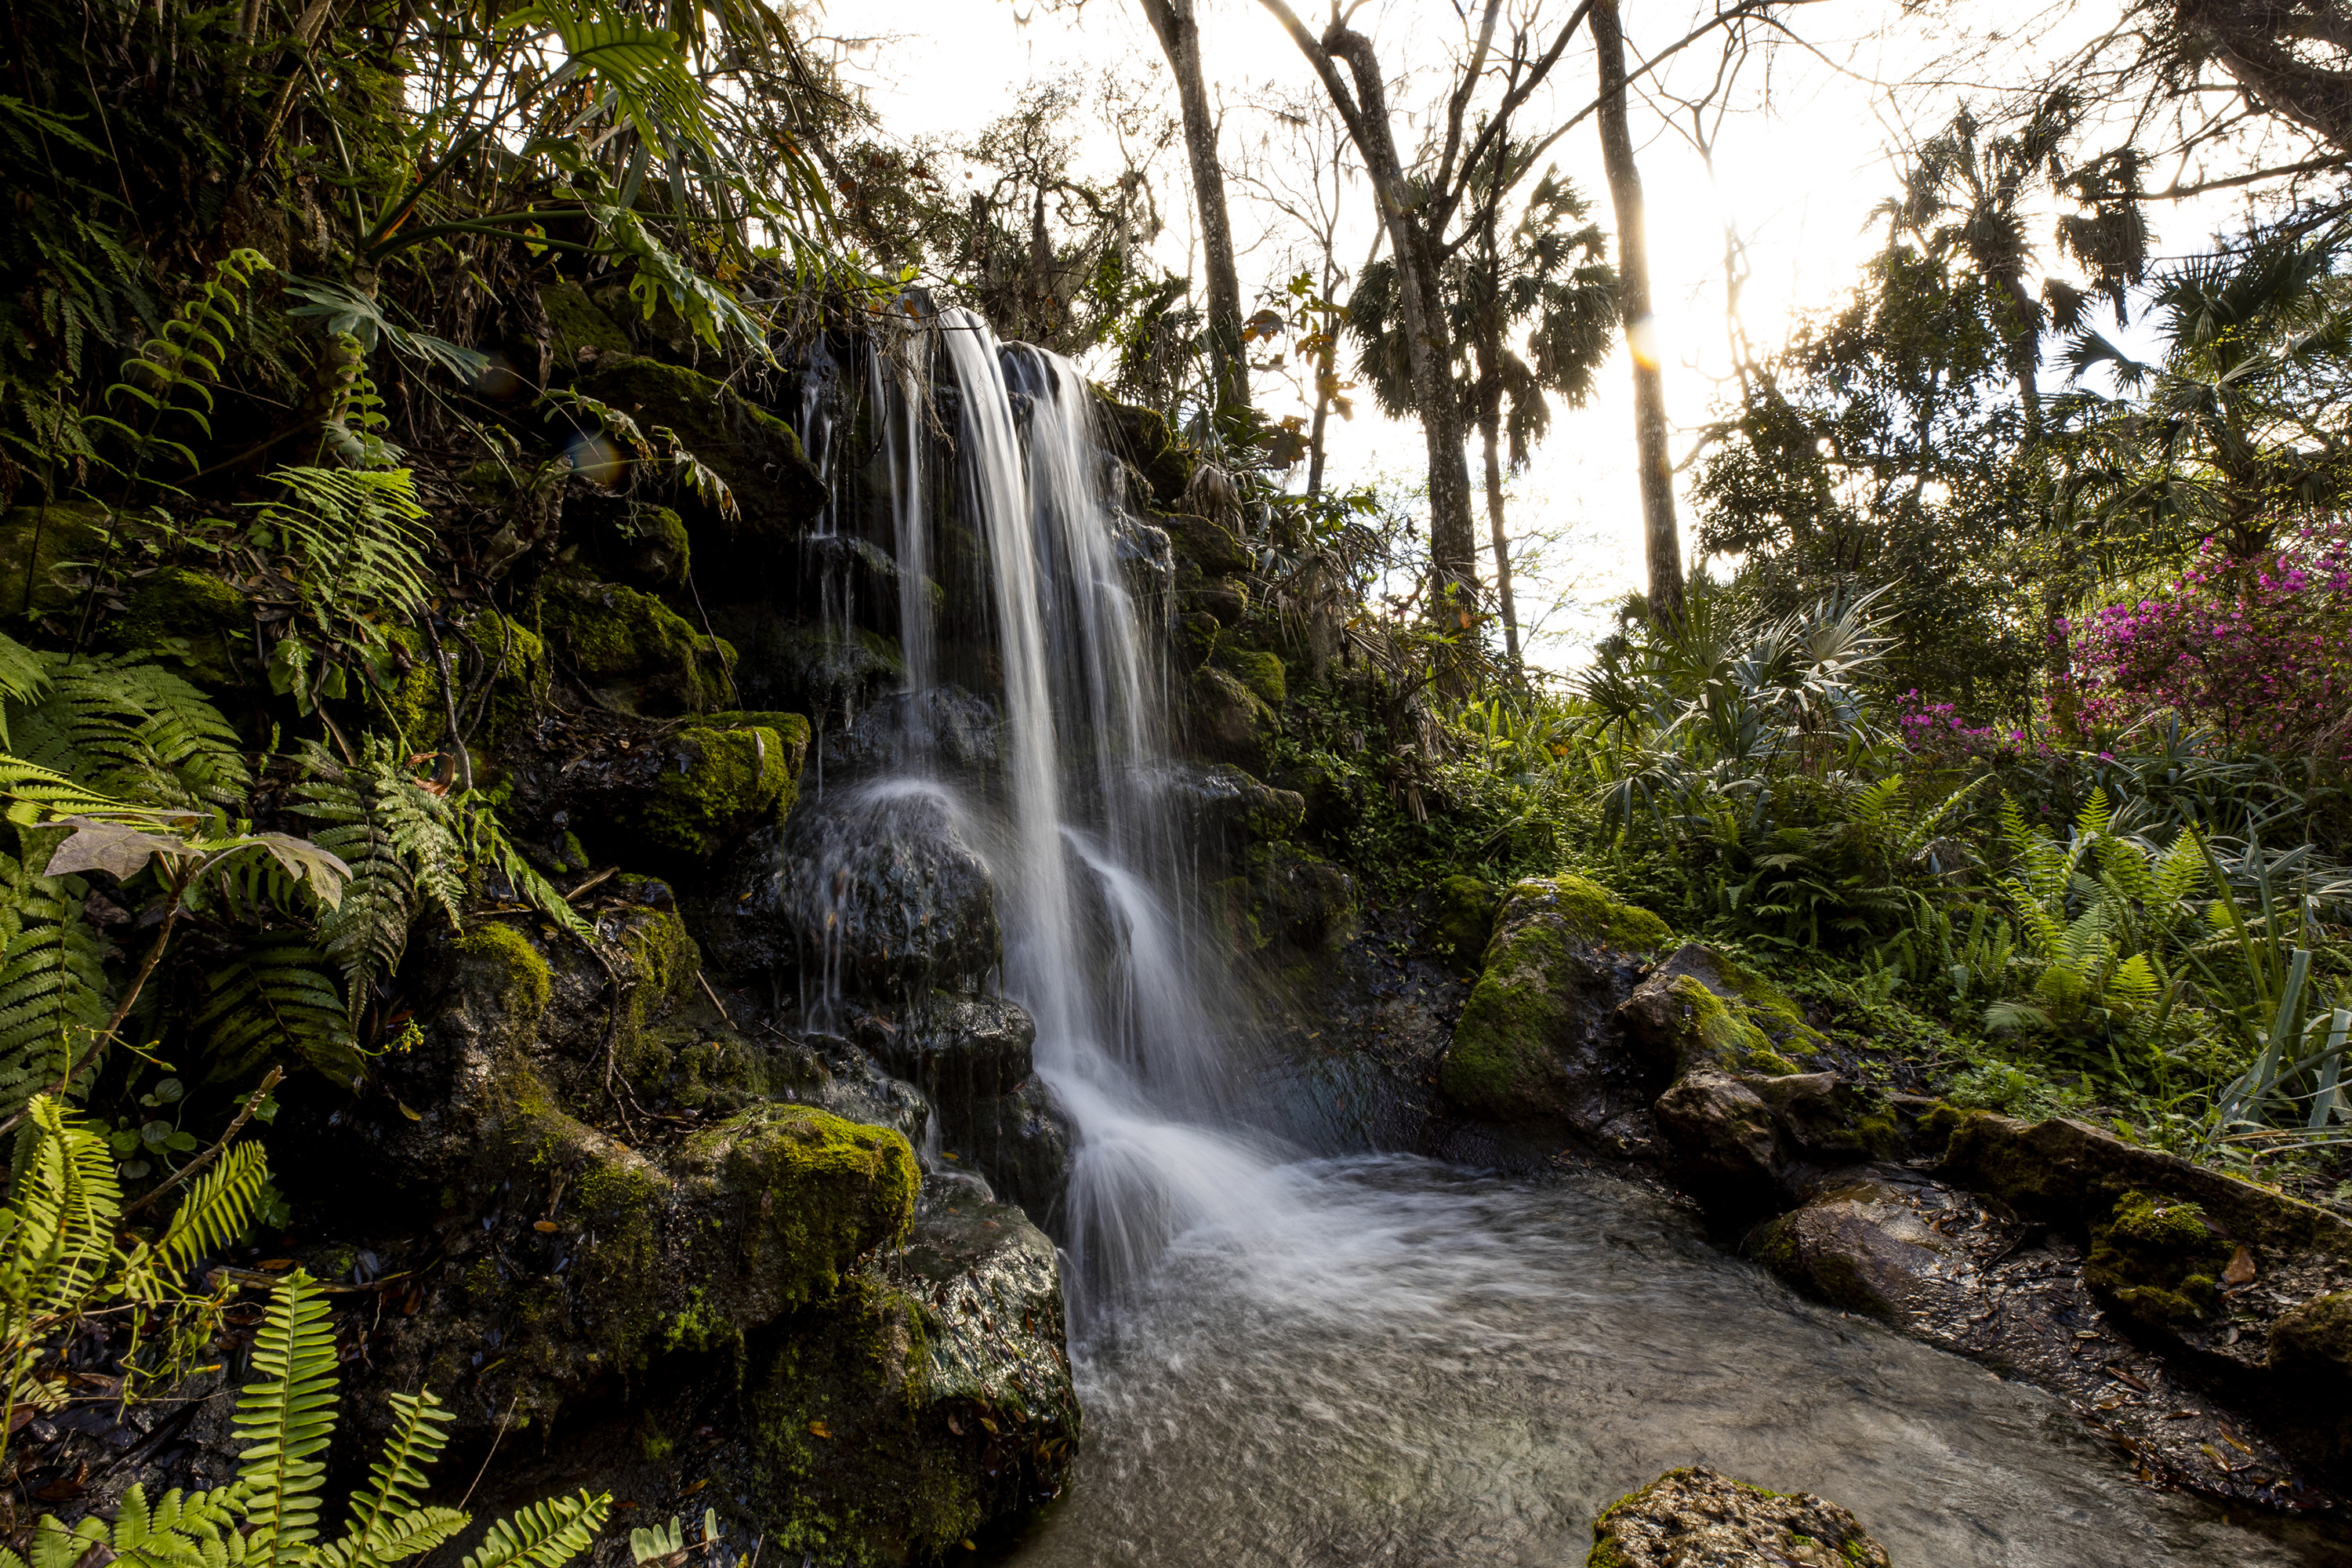 Rainbow Springs State Park provides visitors with three manmade waterfalls, a remnant of the park's private attraction days